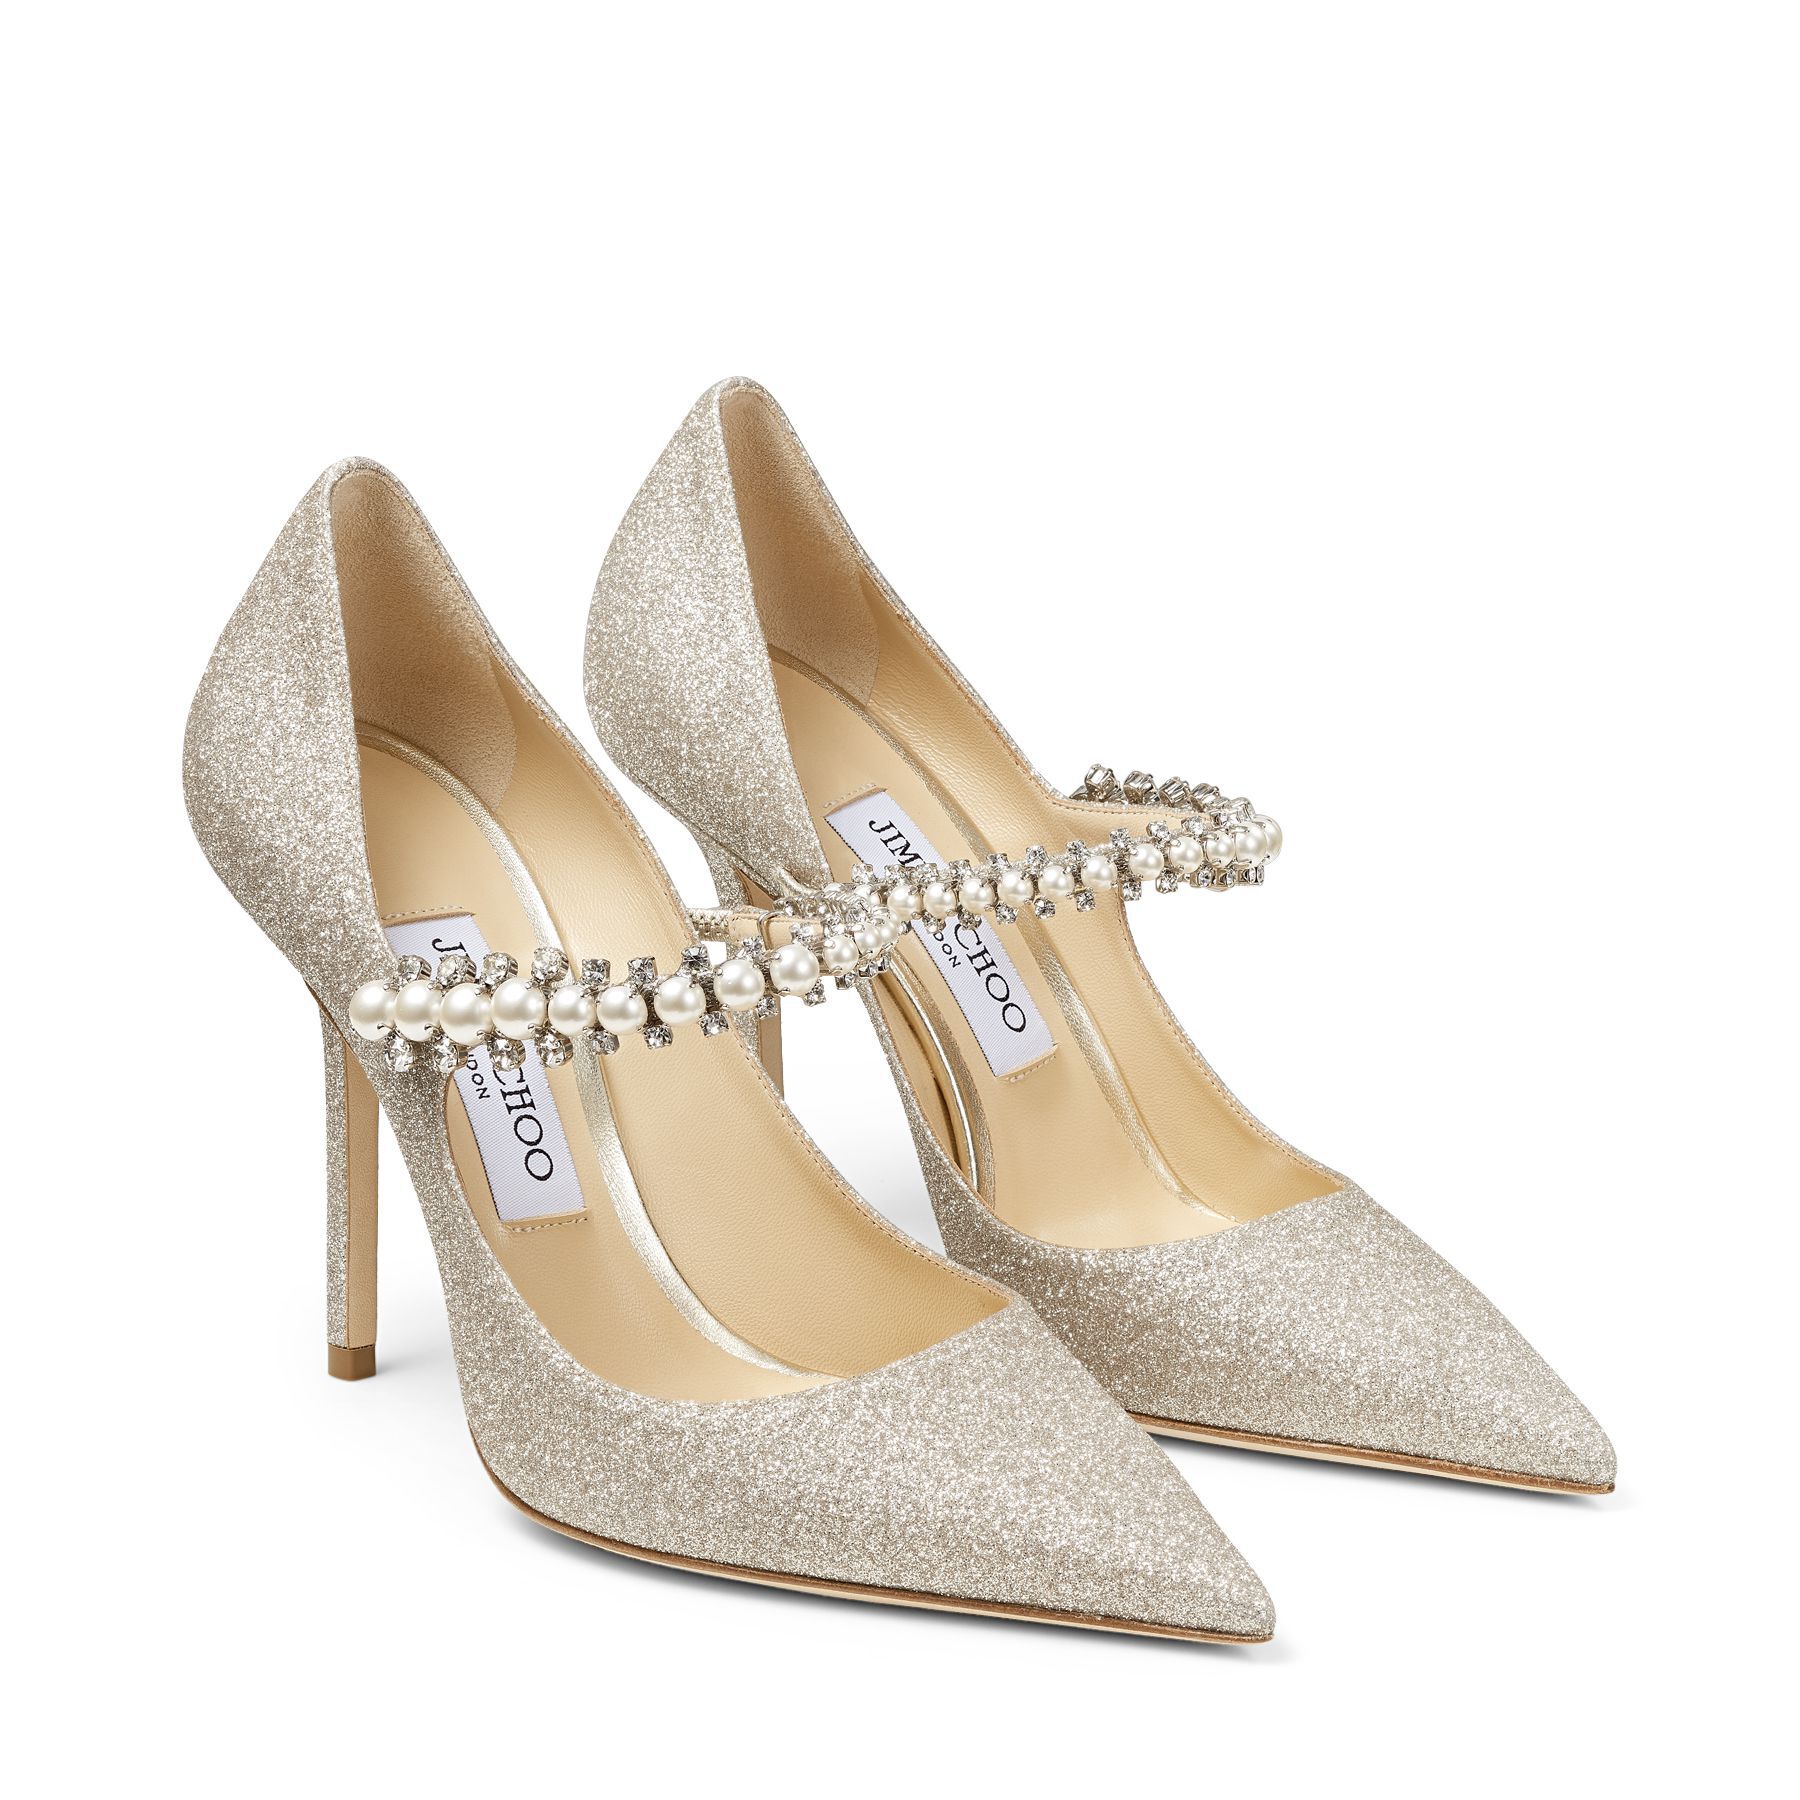 A close up of the Baily 100 shoes by Jimmy Choo. This image features in the Wedding Shoe Style For Every Type Of Bride Article.